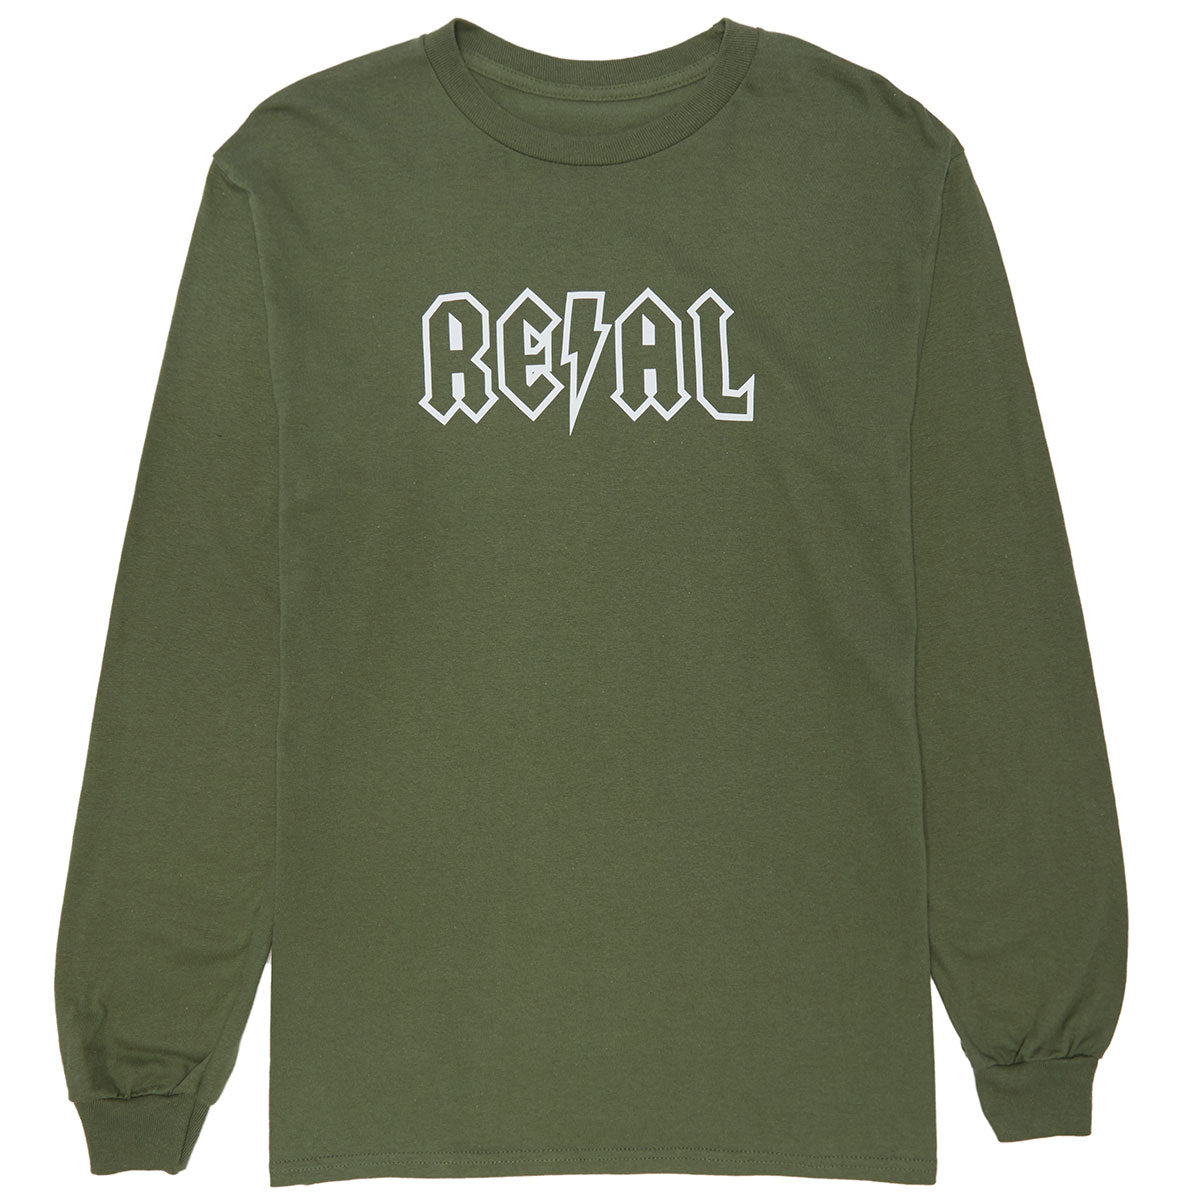 Real Deeds Long Sleeve T-Shirt - Military Green/White image 1